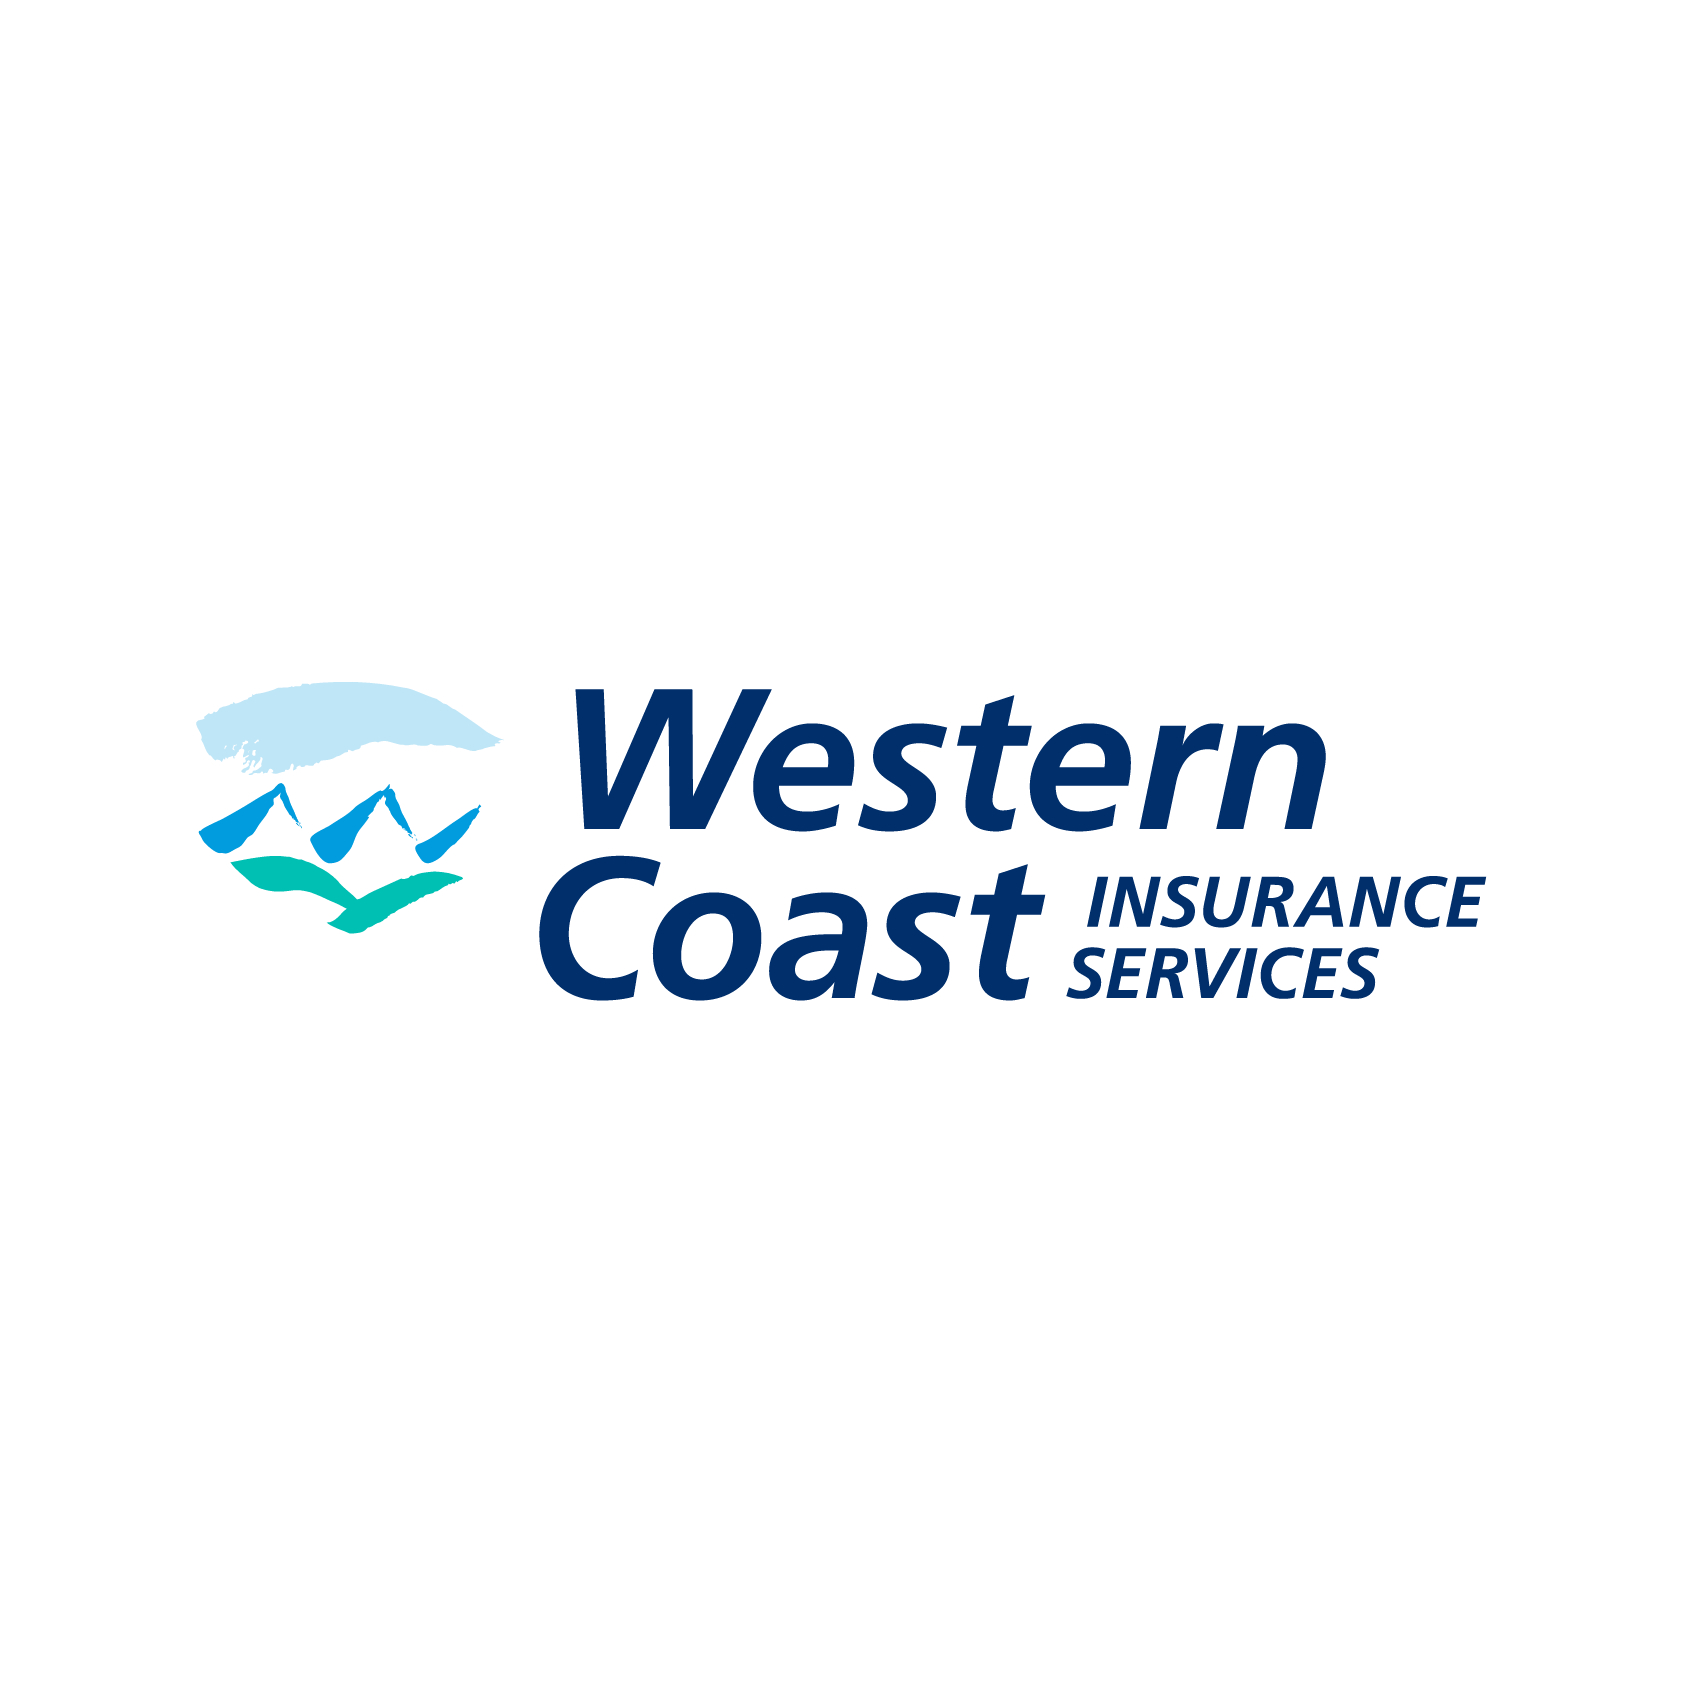 Western Coast Insurance Services Ltd. | Home, Car & Business Insurance - Insurance Agents & Brokers